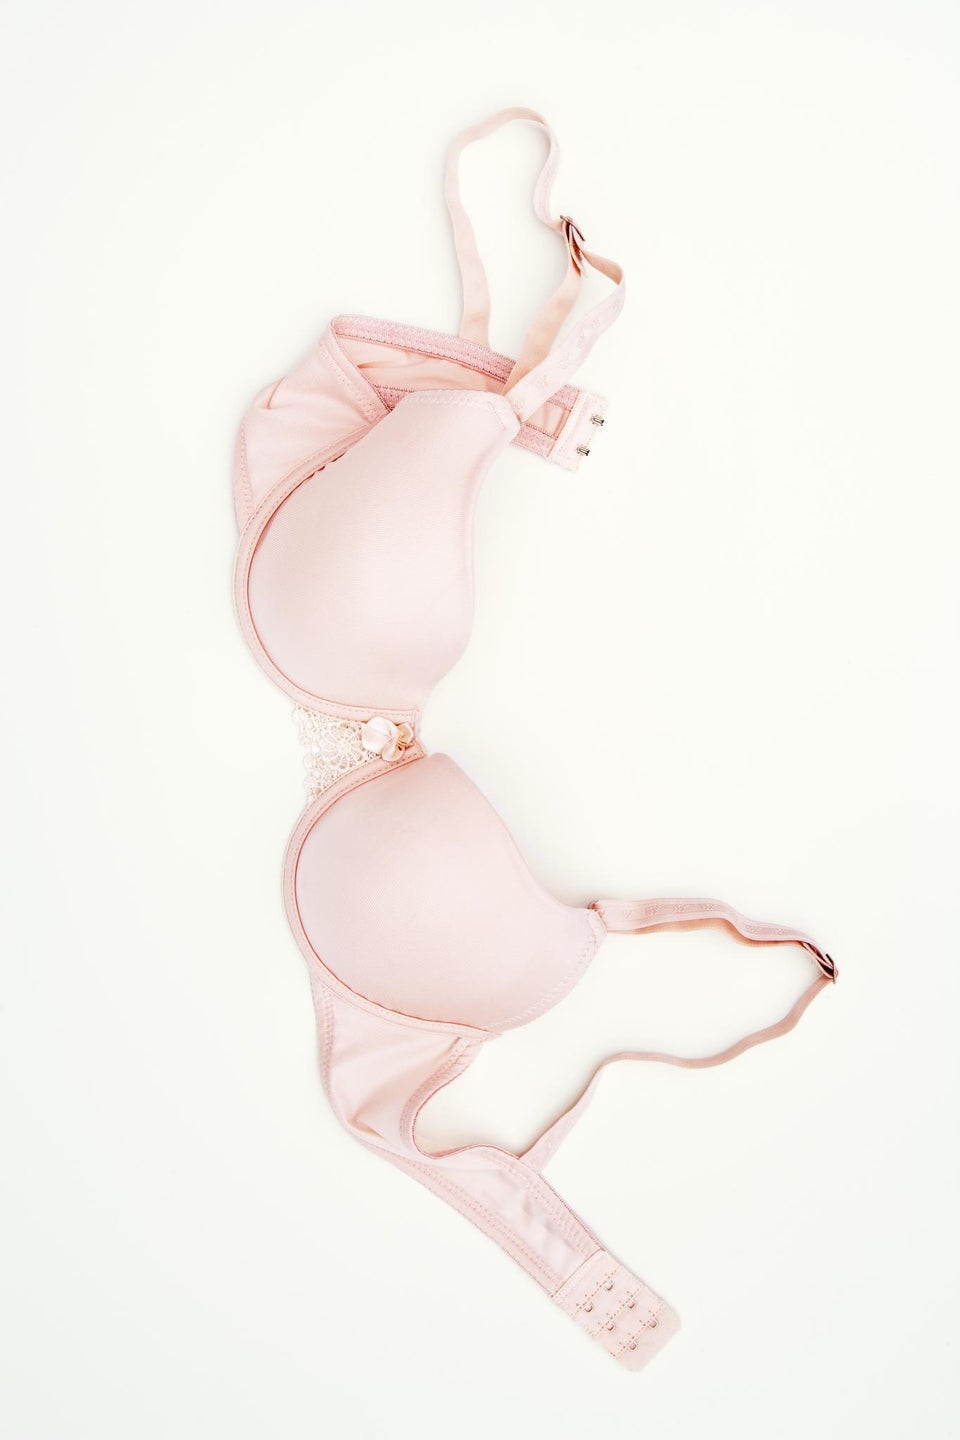 ESSENCE Poll: How Often Do You Wash Your Bra?